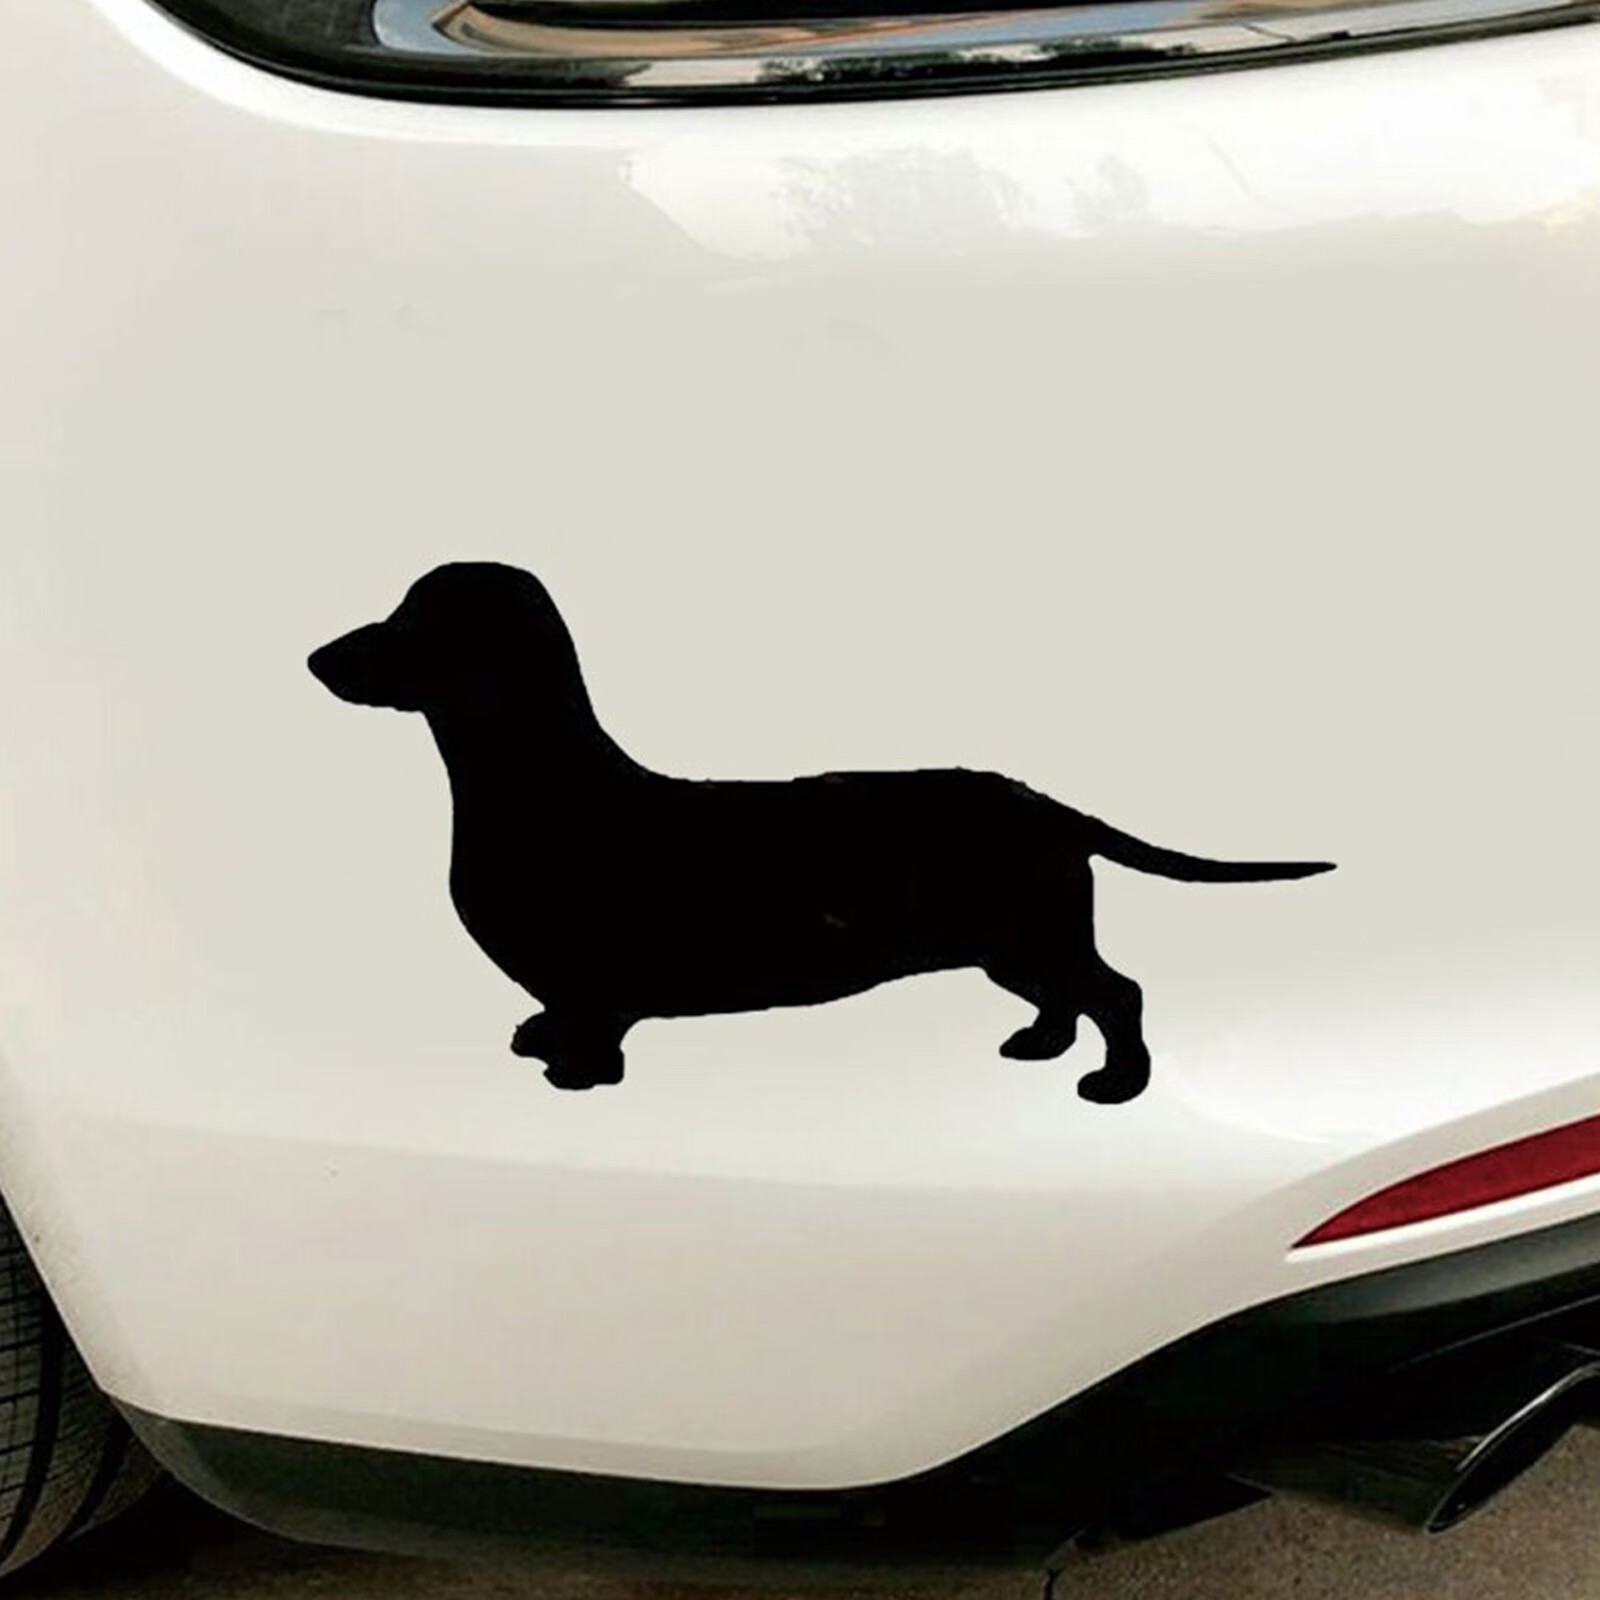 WOCLEILIY Dog Car Stickers Dachshunds Personality Fun Mobile Phone Stickers Computer Stickers Cup Stickers Body Stickers Animal D - image 5 of 6